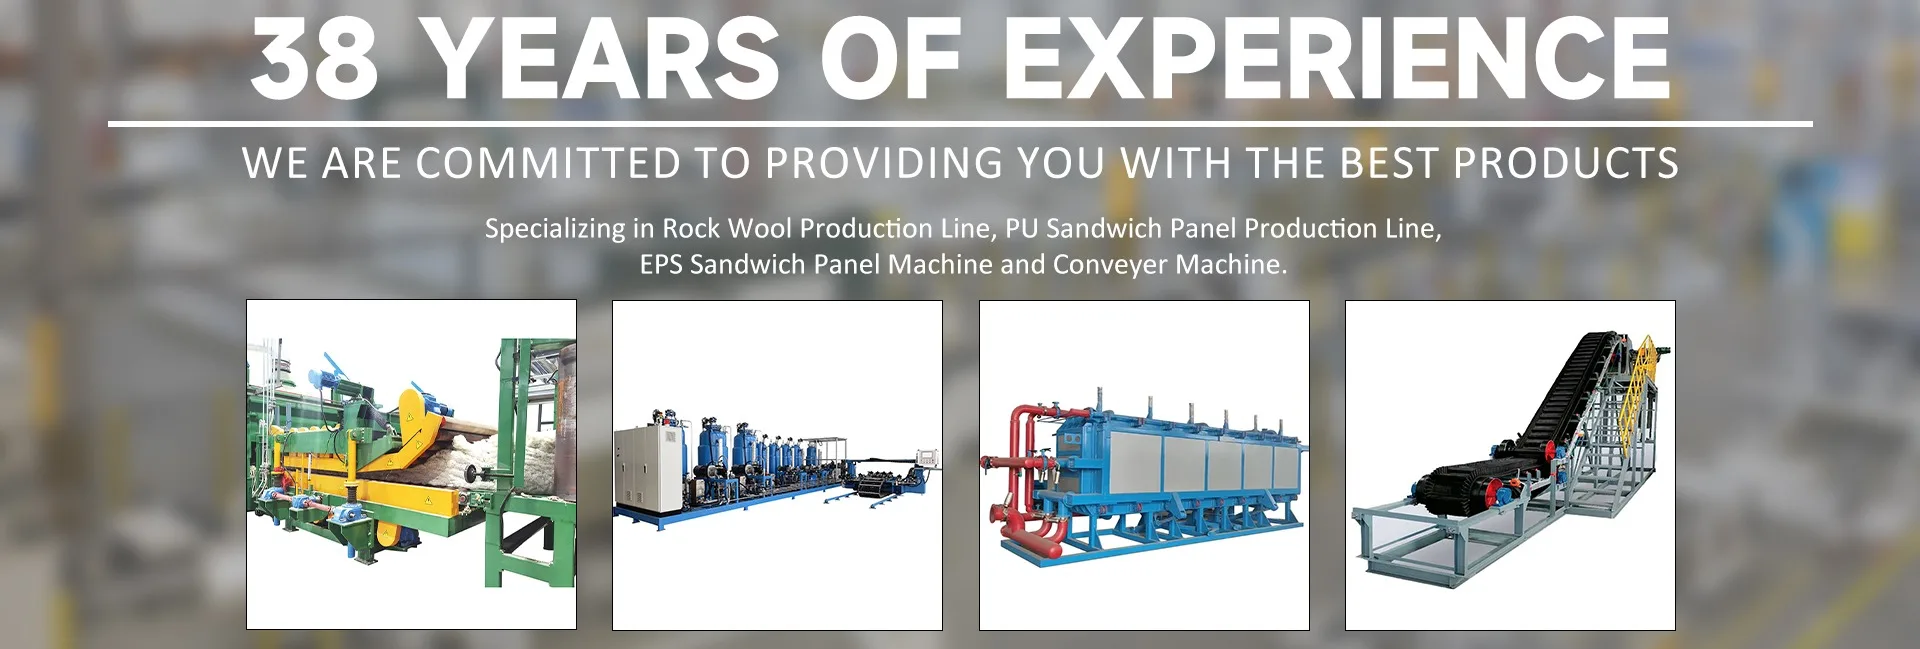 rock wool production line stone wool production line  Mineral wool prduction line PU Sandwich Panel Production Line PU PIR PUR rockwool sandwich production line  EPS Machine EPS Shape Molding Production Line EPS Panel Production Line Foam Machine EPS Shape Molding Machine EPS Machines EPS Production Line